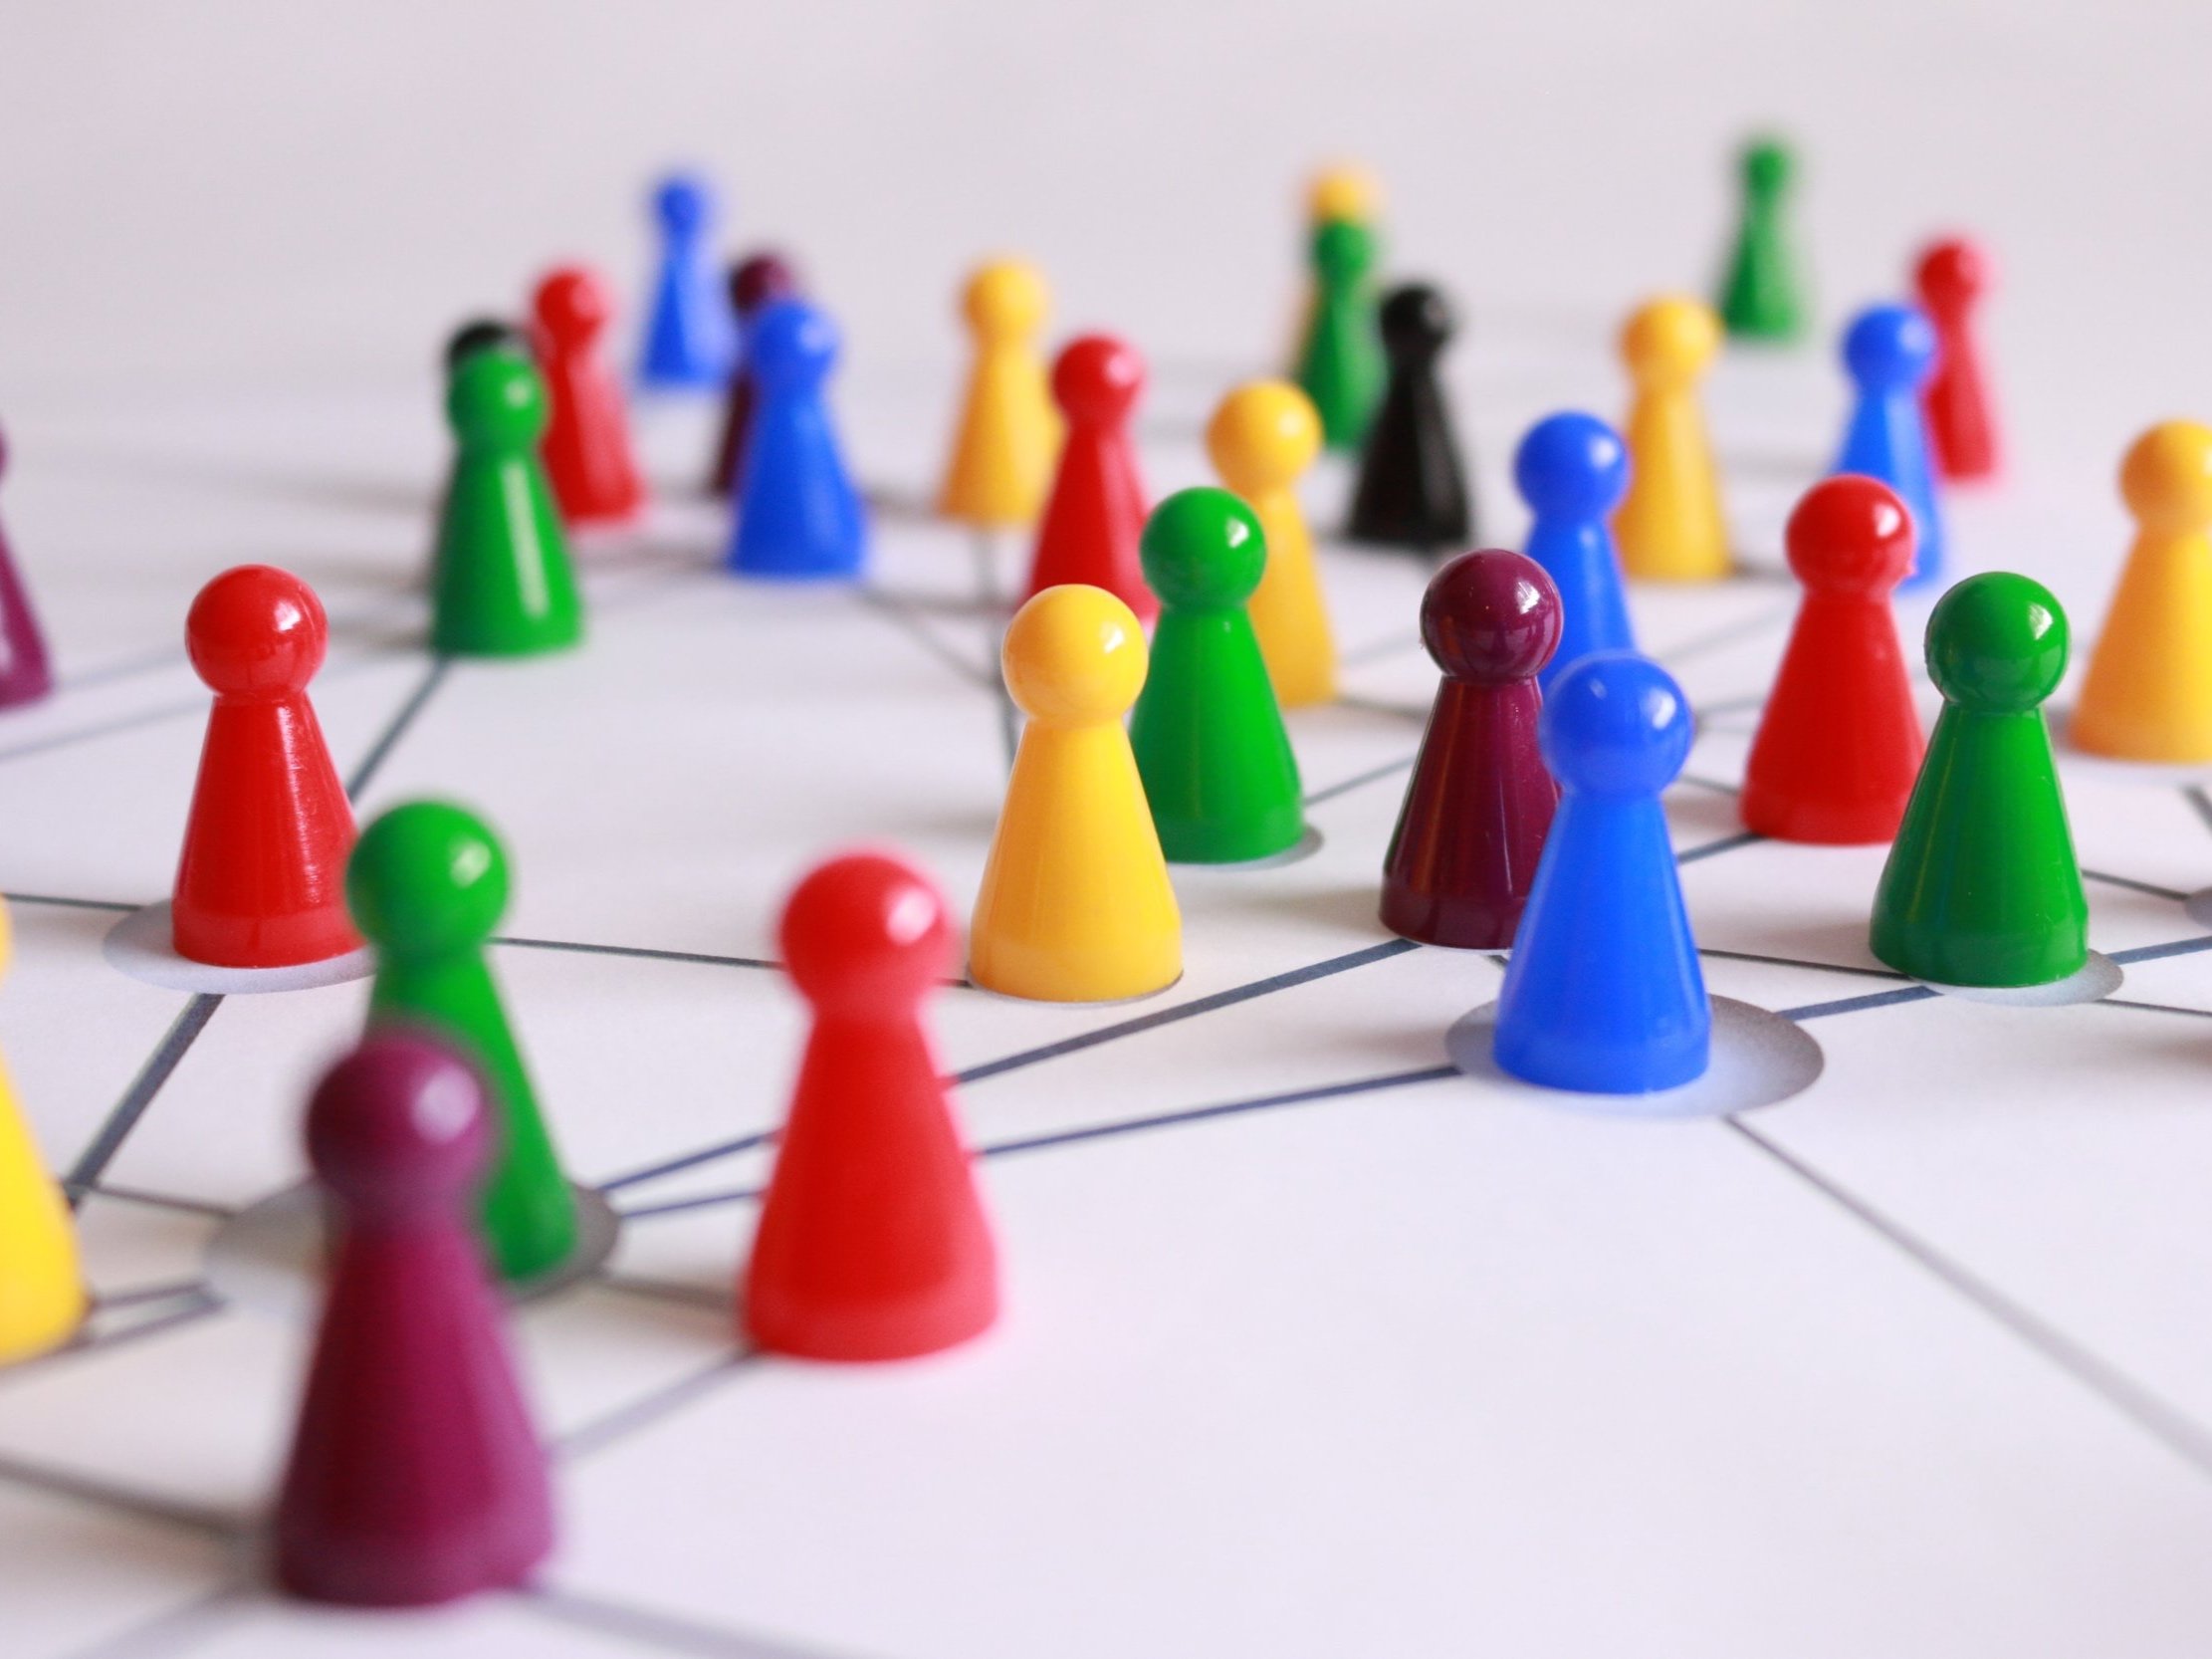 Networking is demonstrated with yellow, green, red, and brown plastic cones on a white-lined table.